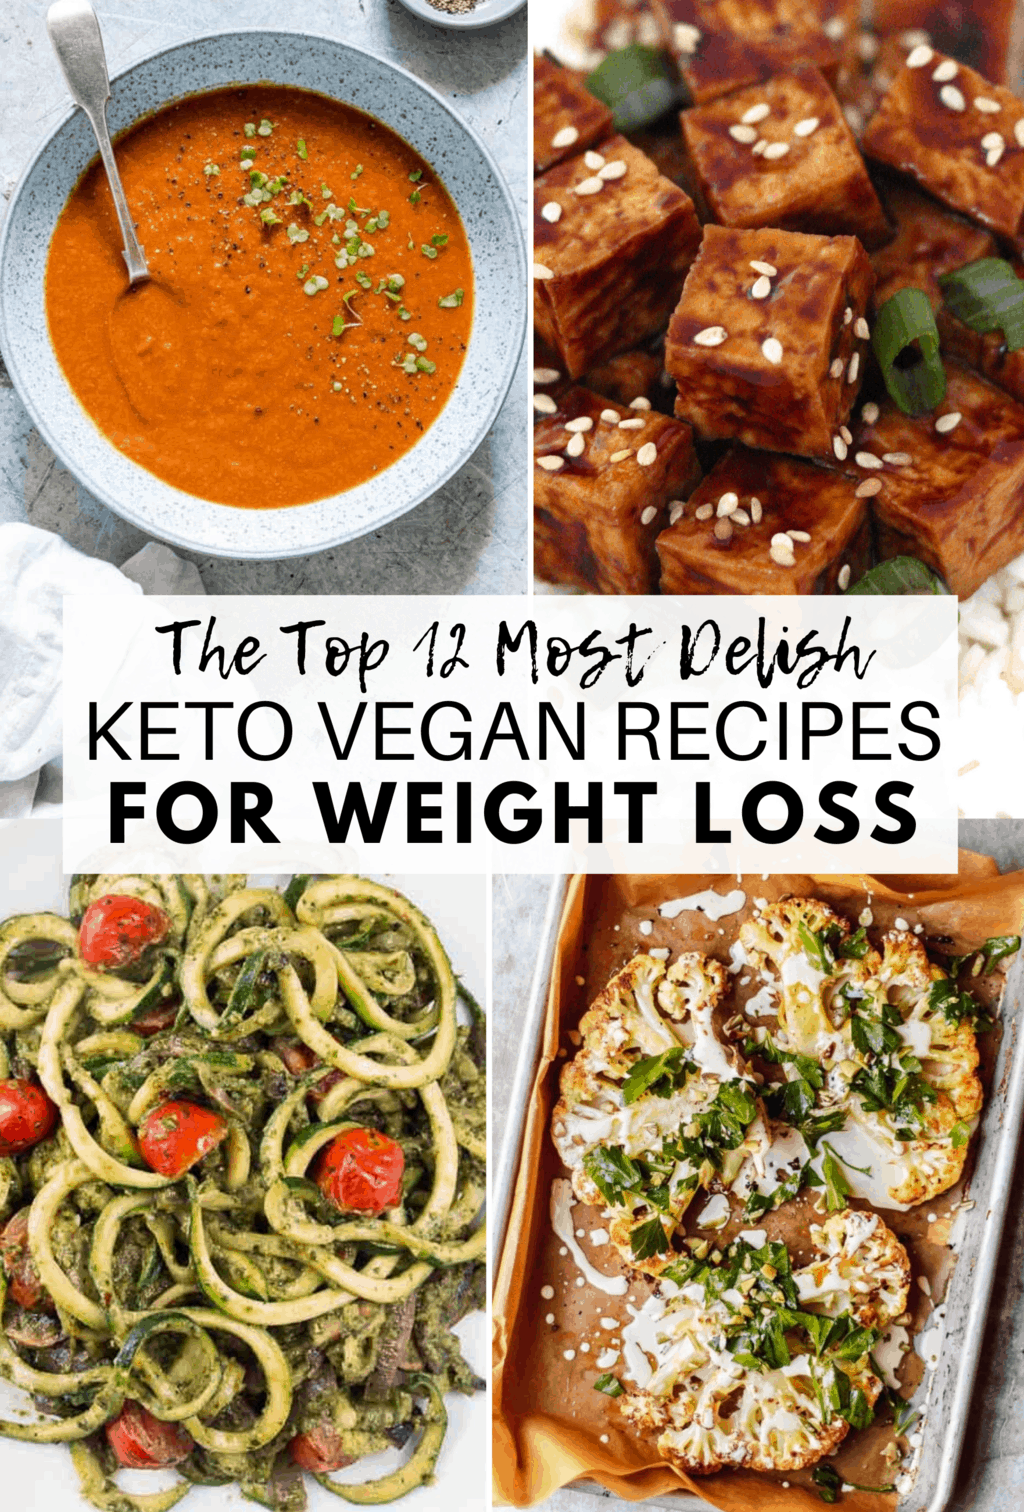 The 12 BEST Keto Vegan Recipes for Weight Loss (Gluten